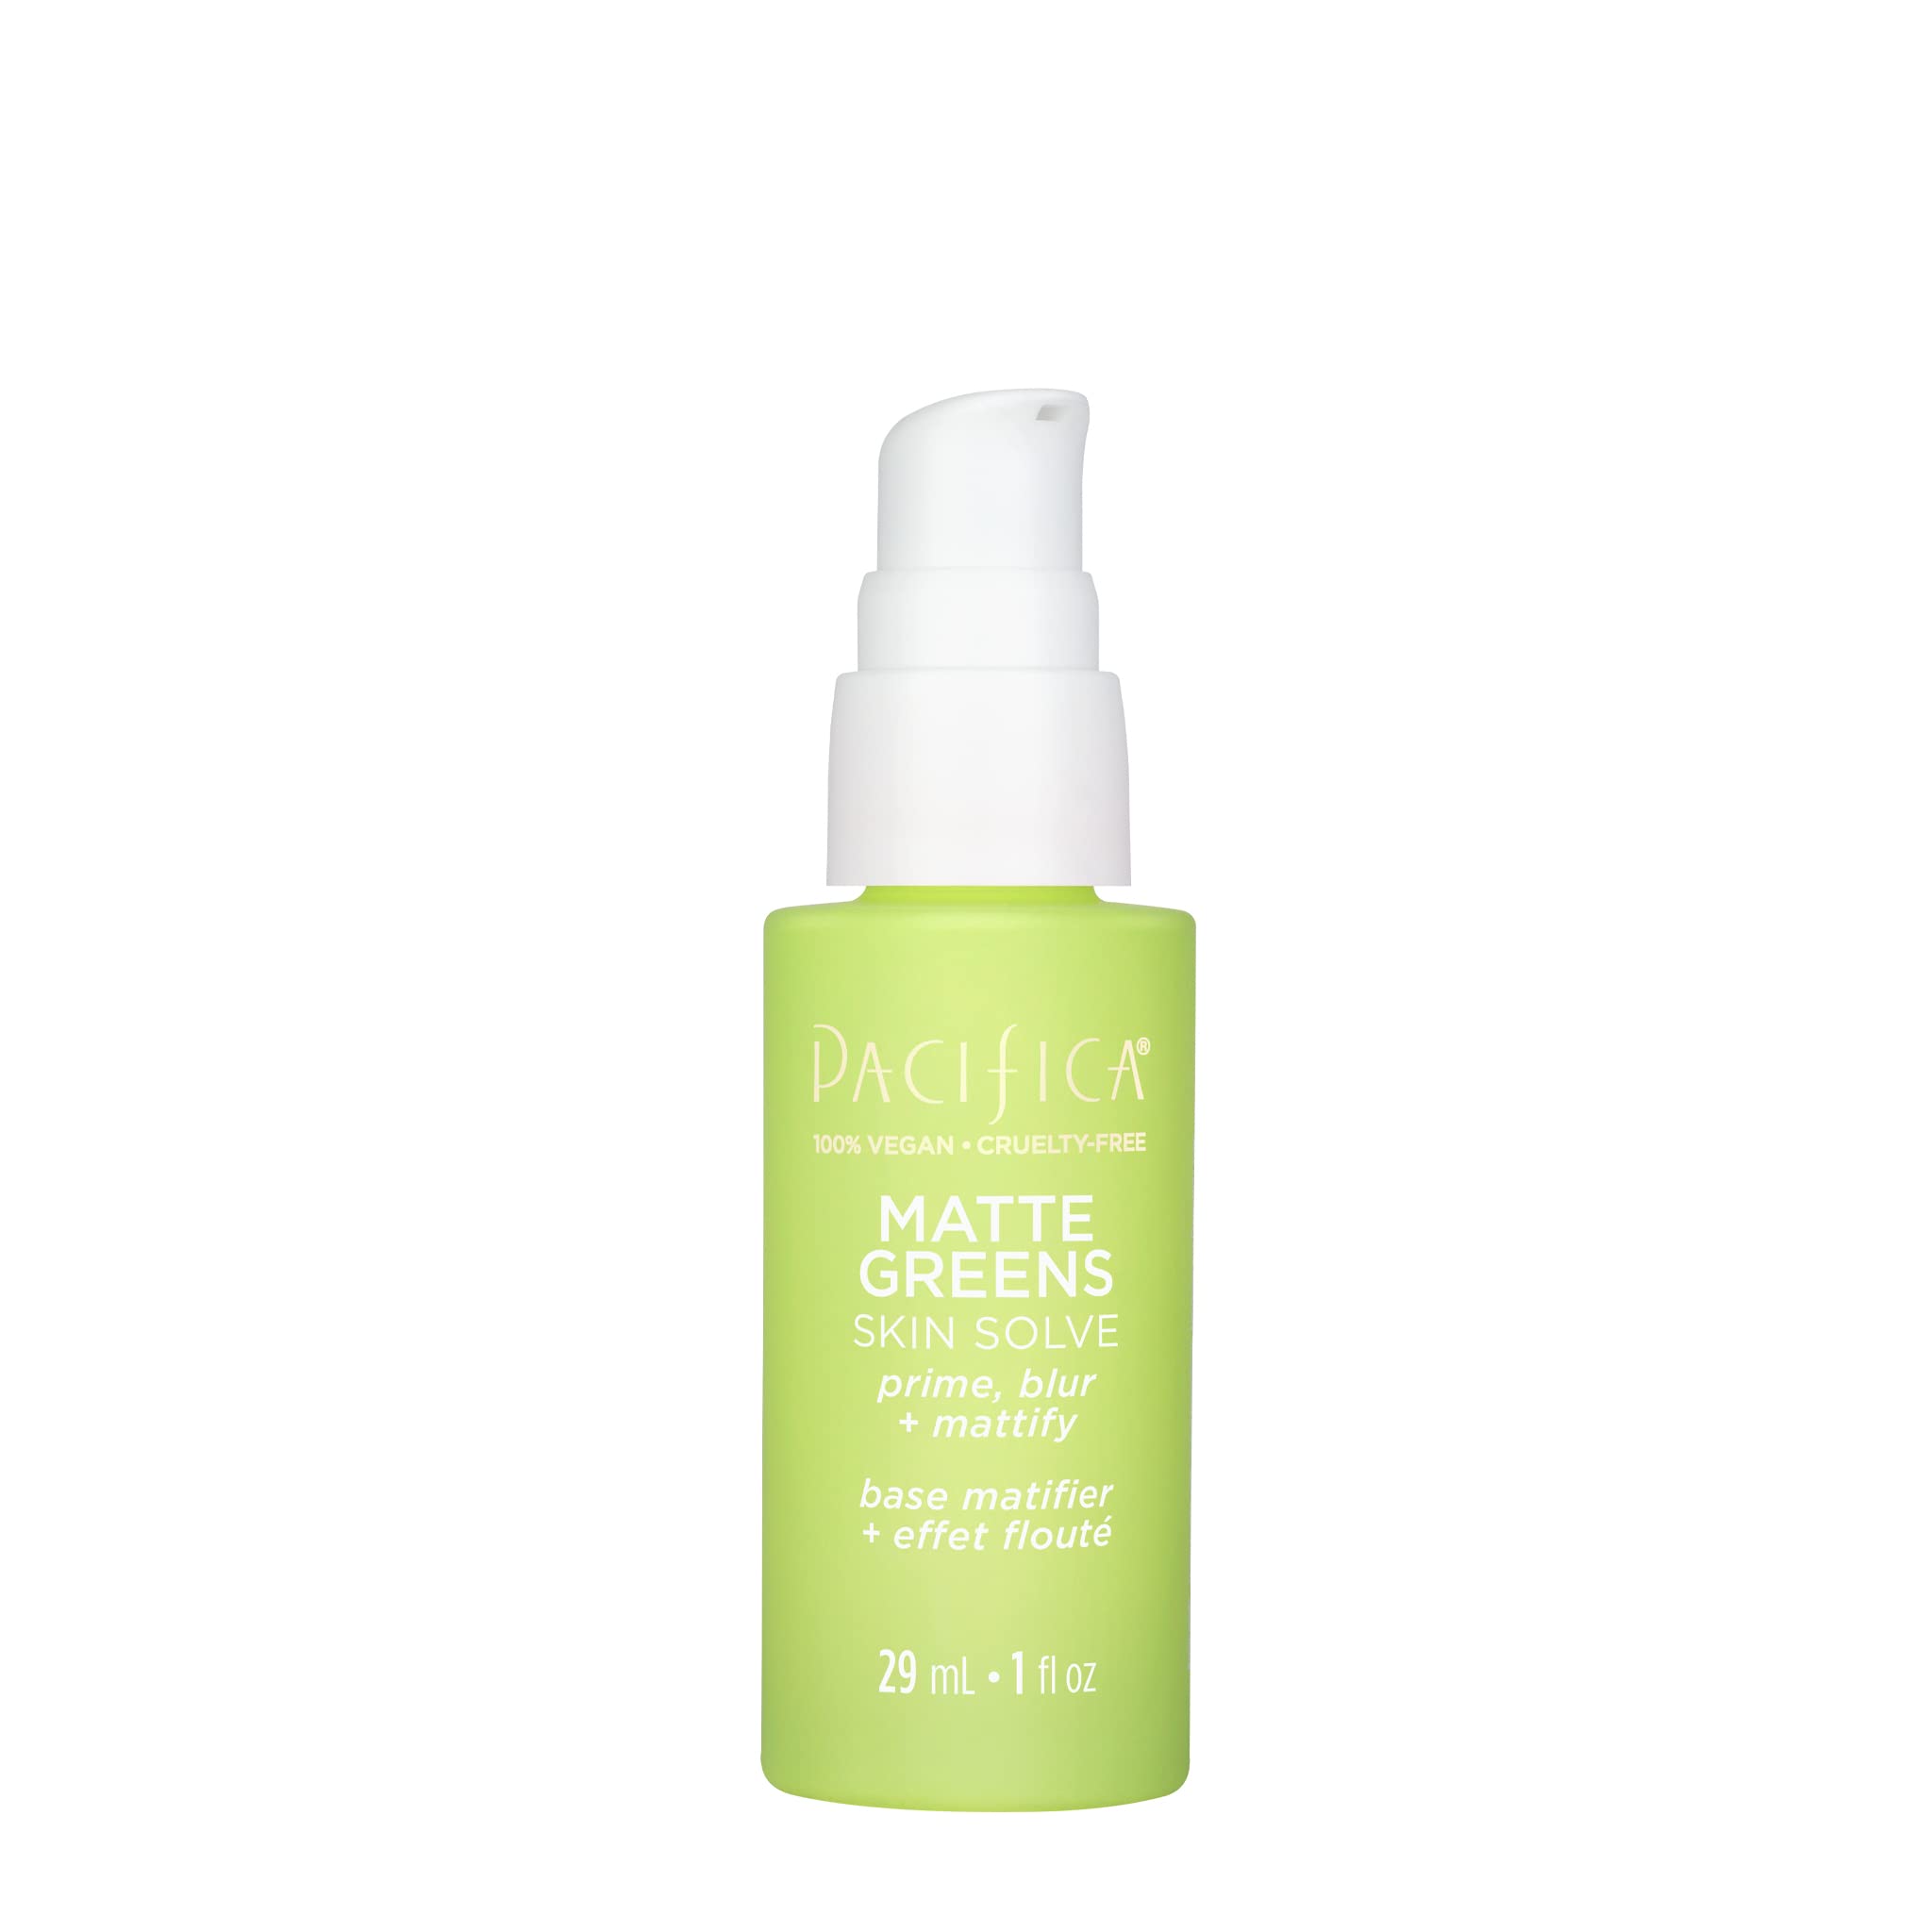 Pacifica Beauty, Matte Greens Skin Solve Makeup Primer, Green Color Corrector, Prime, Blur, Mattify, Reduce Redness, Minimize Appearance of Pores, Helps with Uneven Texture, Silky Soft, Vegan